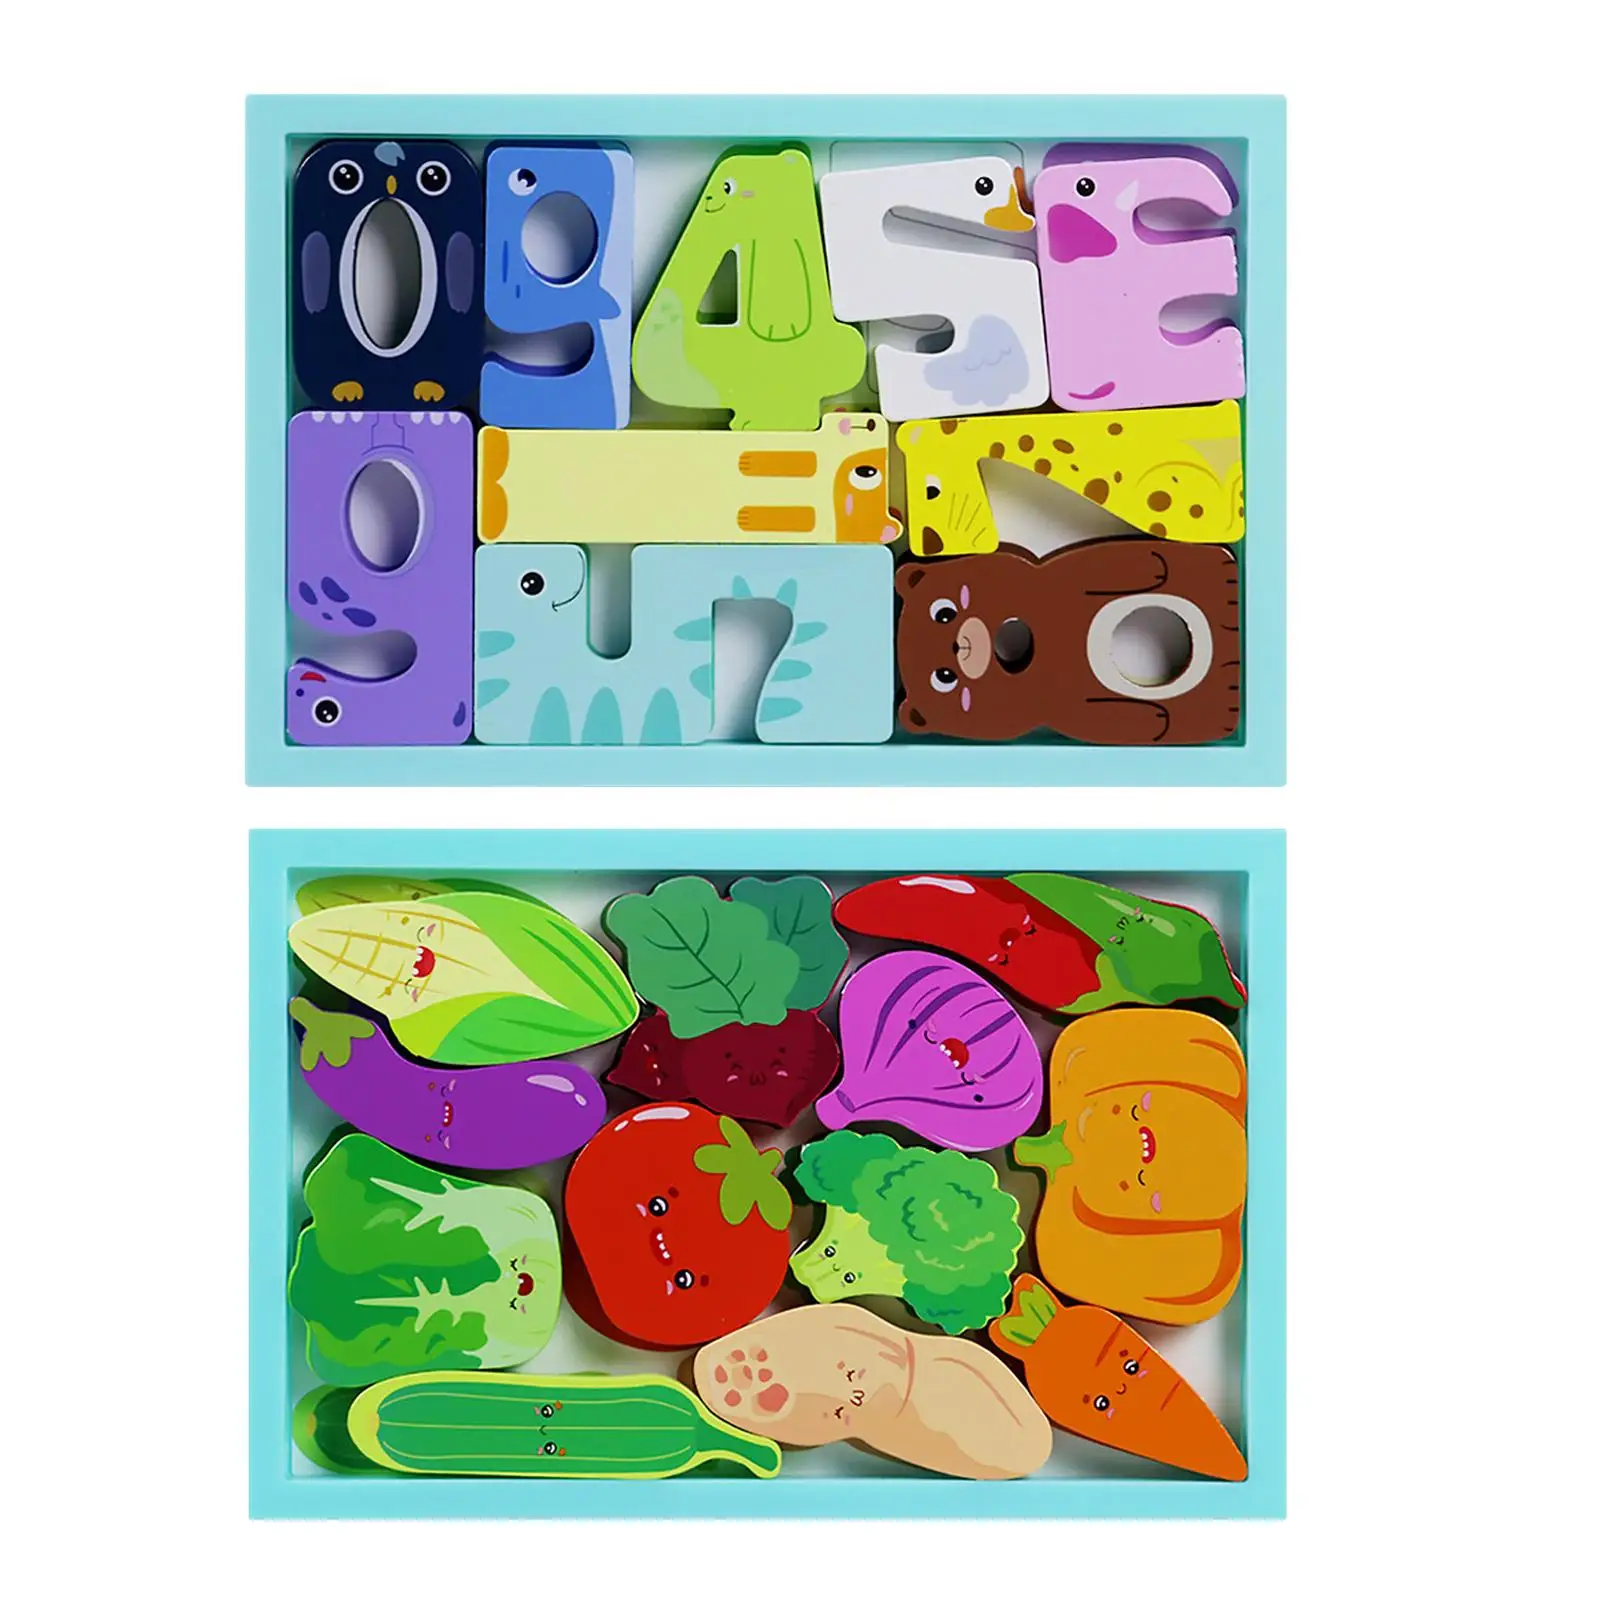 

wooden Jigsaw Educational Preschool Toys Children Gift Colors Shapes Cognition Cartoon Toys Montessori Toys Kids Baby